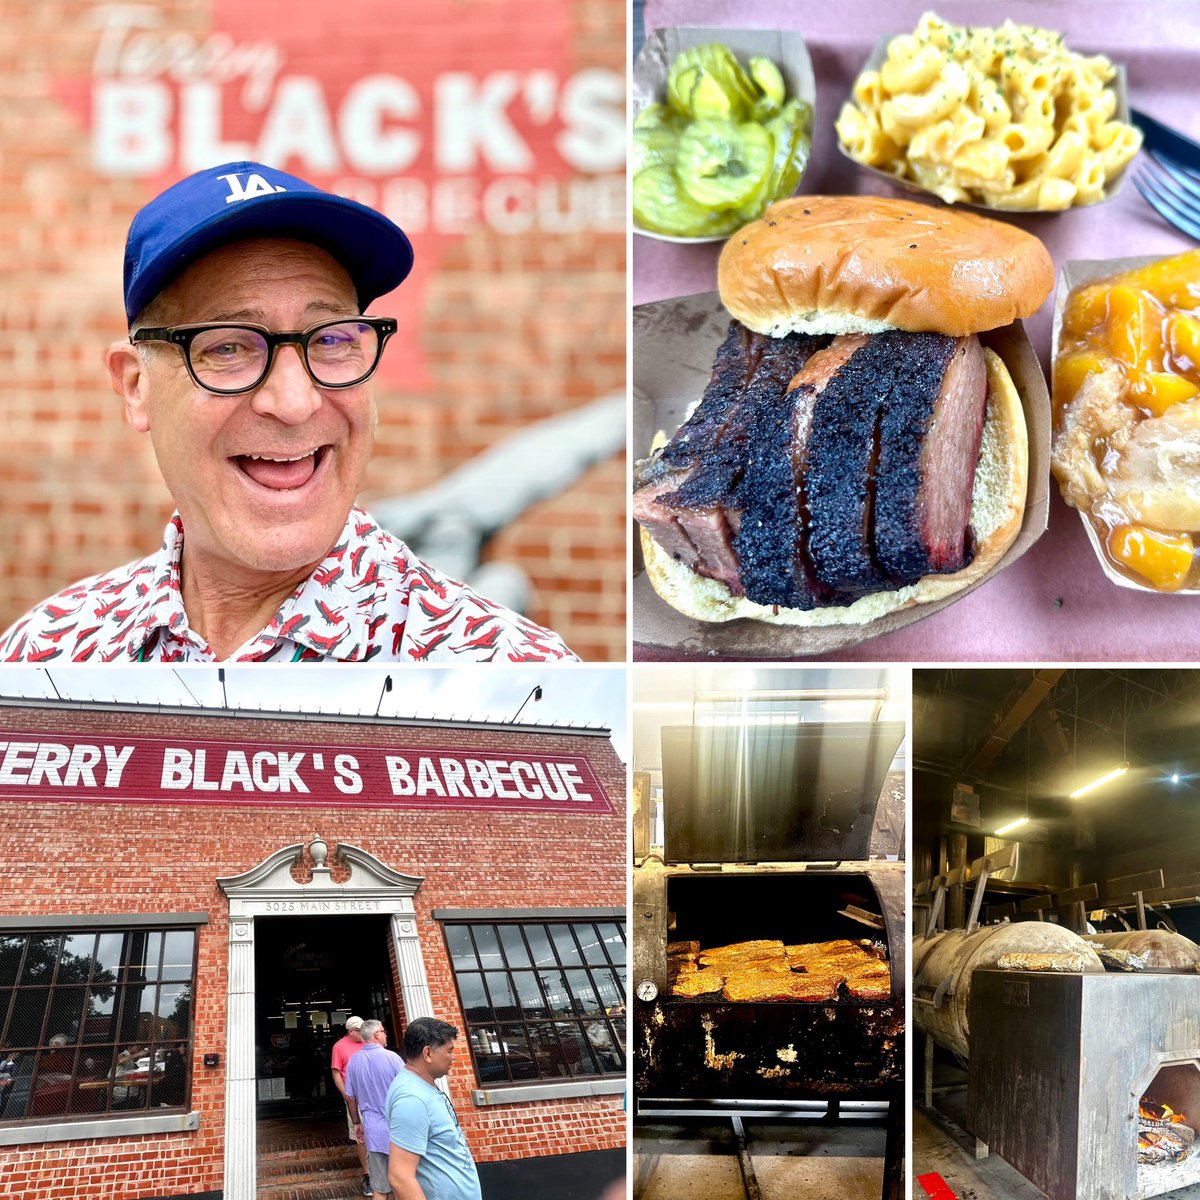 #whatsforlunch in Dallas? 🤠
@TerryBlacks_BBQ in Deep Ellum!
The BRISKET was amazingly smoky & delicious 🤤 
I took it off the bun, ate about 1/3 of Mac-n-cheese & just the peaches in cobbler! 
Oh my, oh my! 🤩🥰